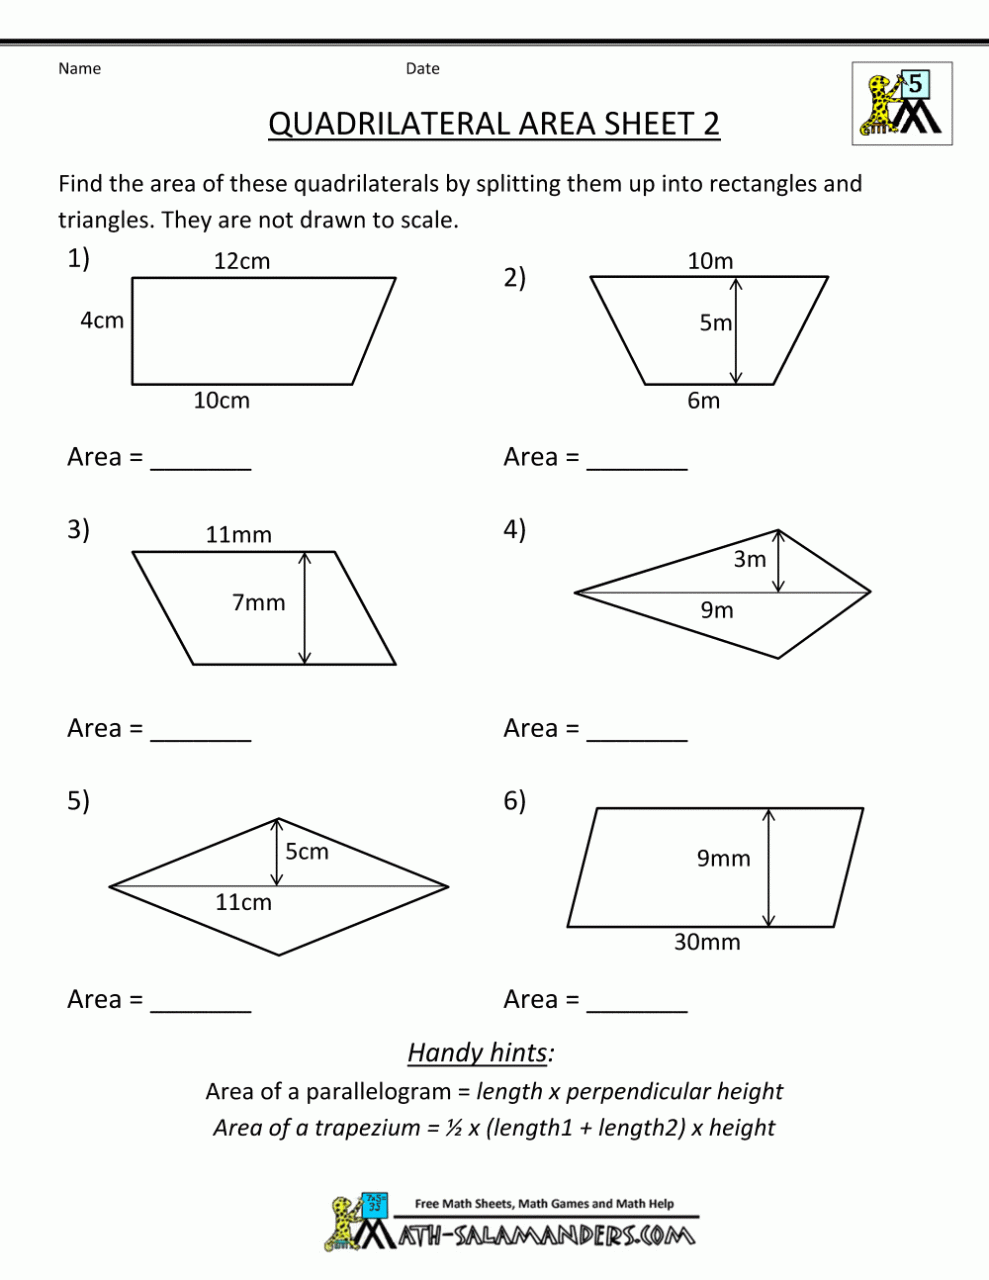 6th-grade-geometry-worksheets-with-answers-kidsworksheetfun